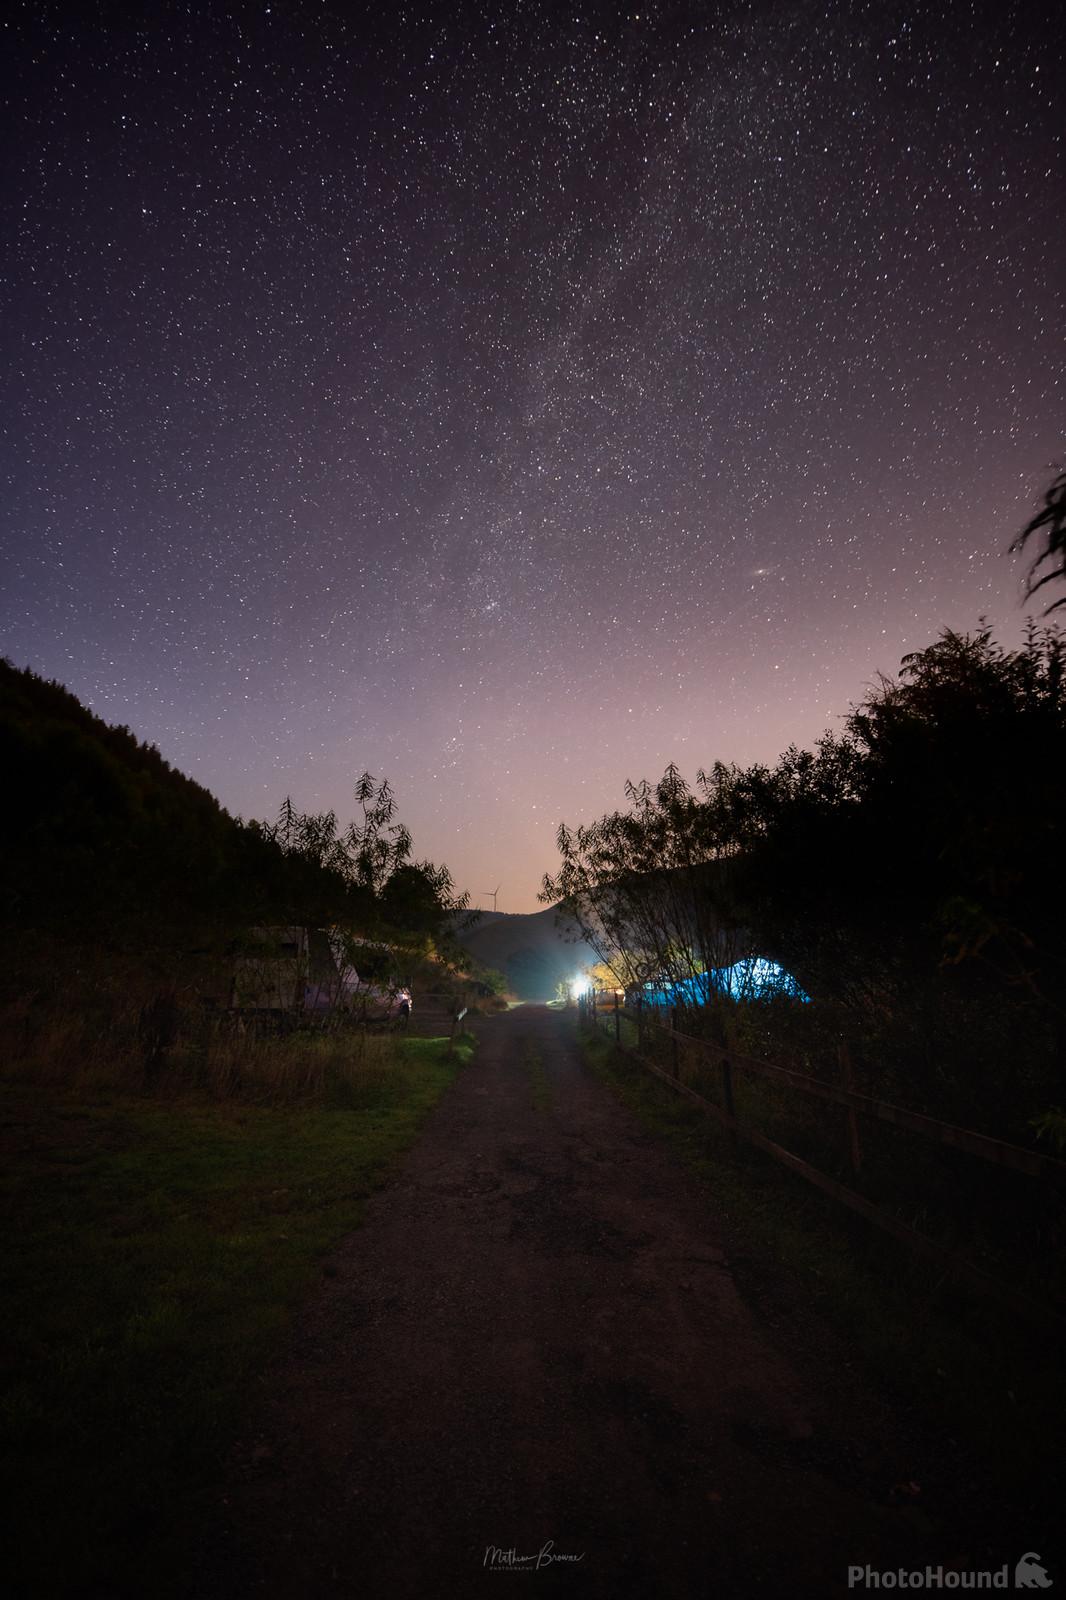 Image of Willow Springs Campsite by Mathew Browne